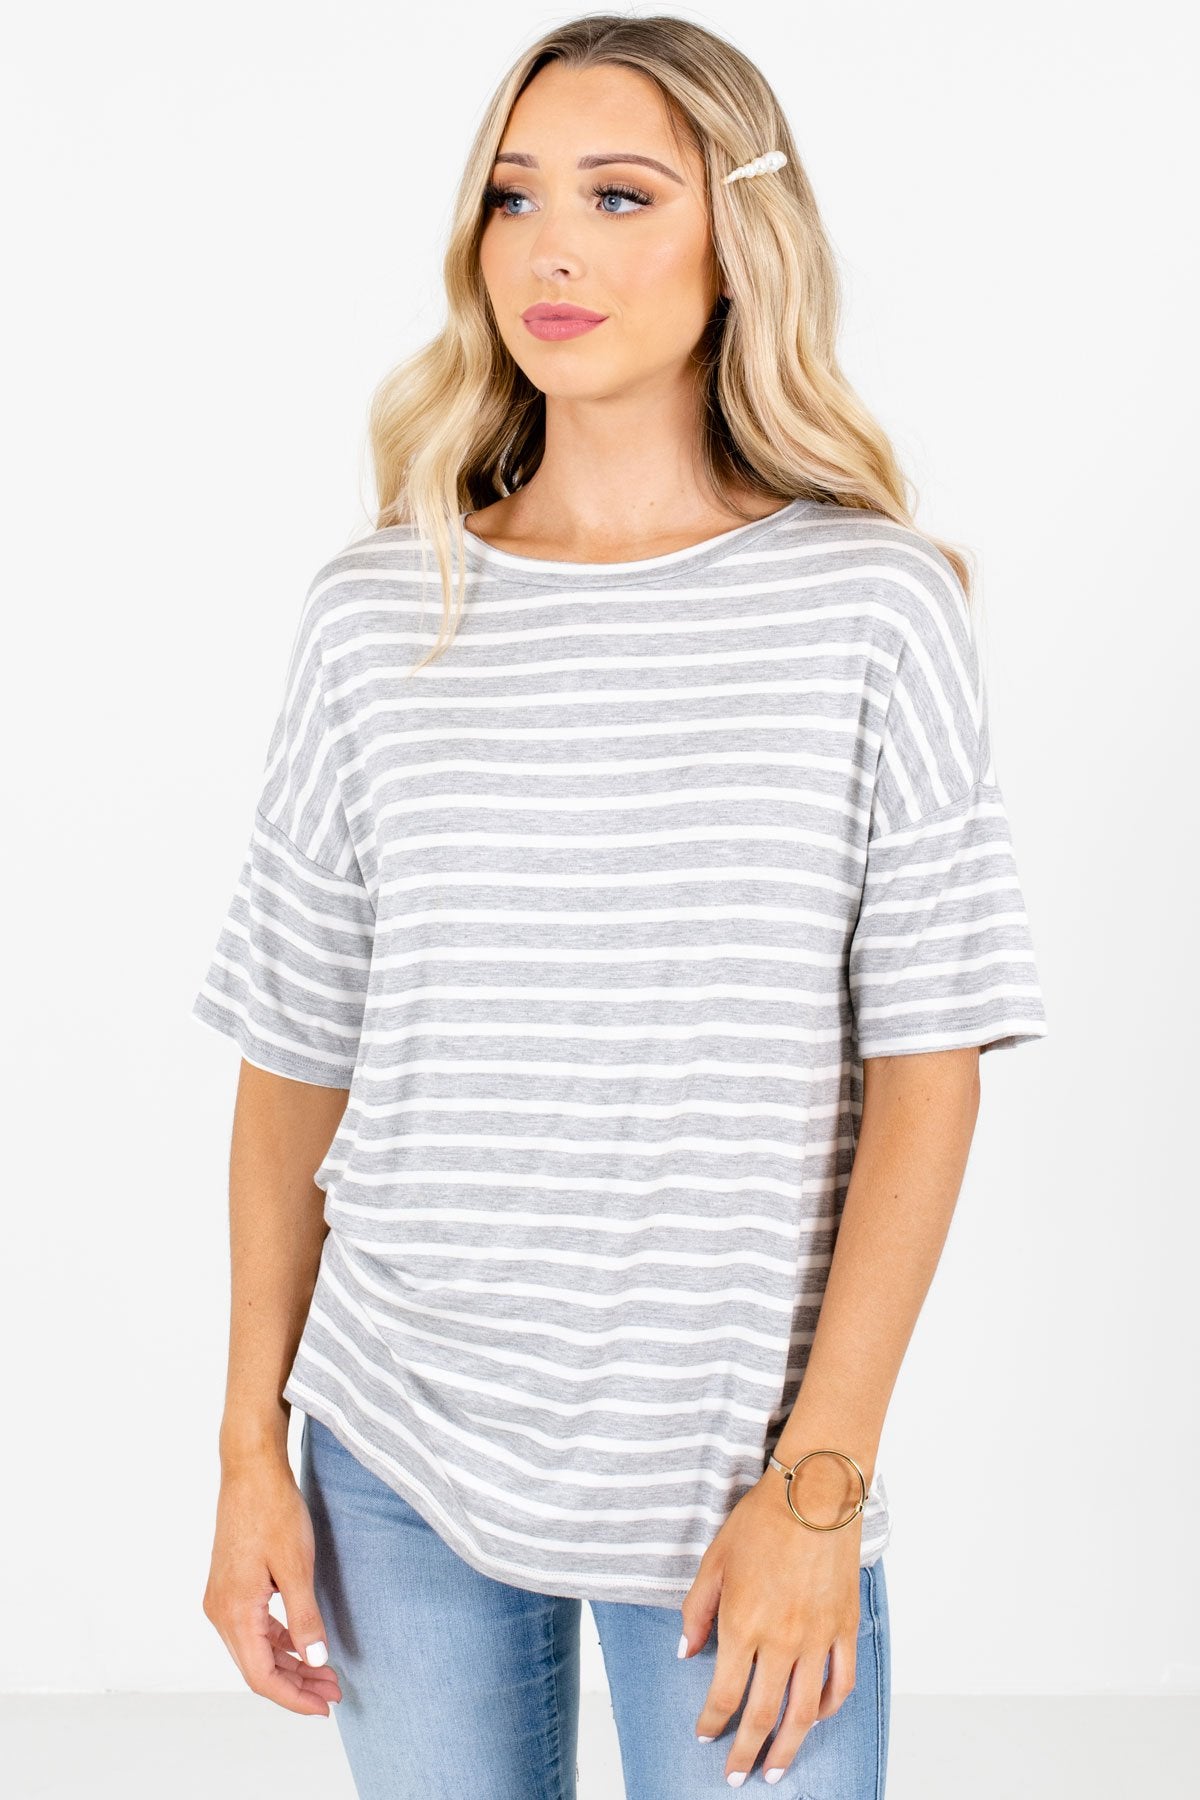 Gray and White Striped Boutique Tops for Women